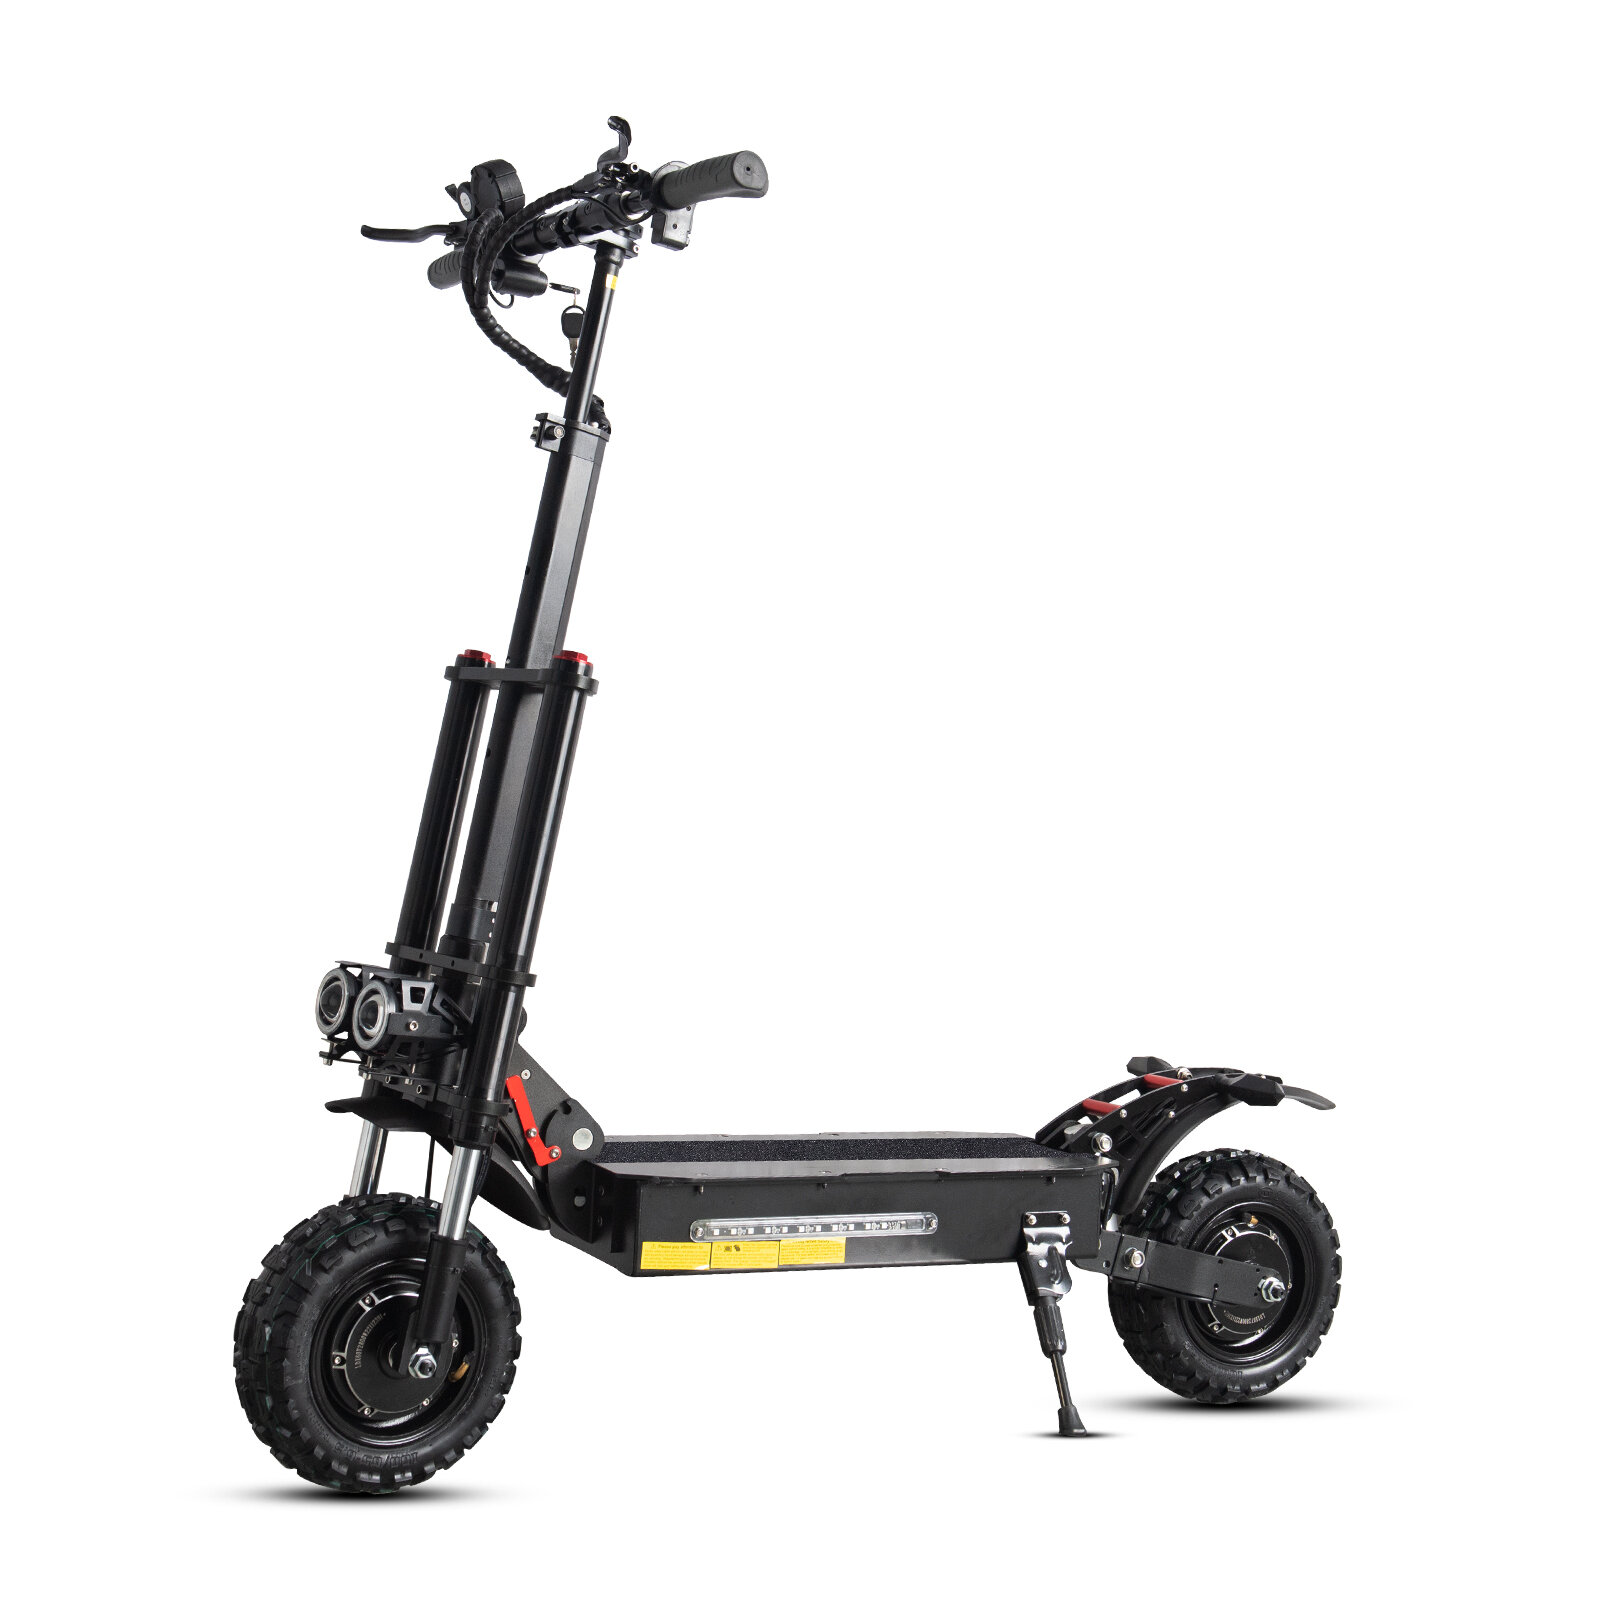 [USA DIRECT] Q12 PLUS 60V 27AH 5600W Dual Motor 11 Inch 11 Inch Electric Scooter 150Kg Max Load 65-80Km Range COD